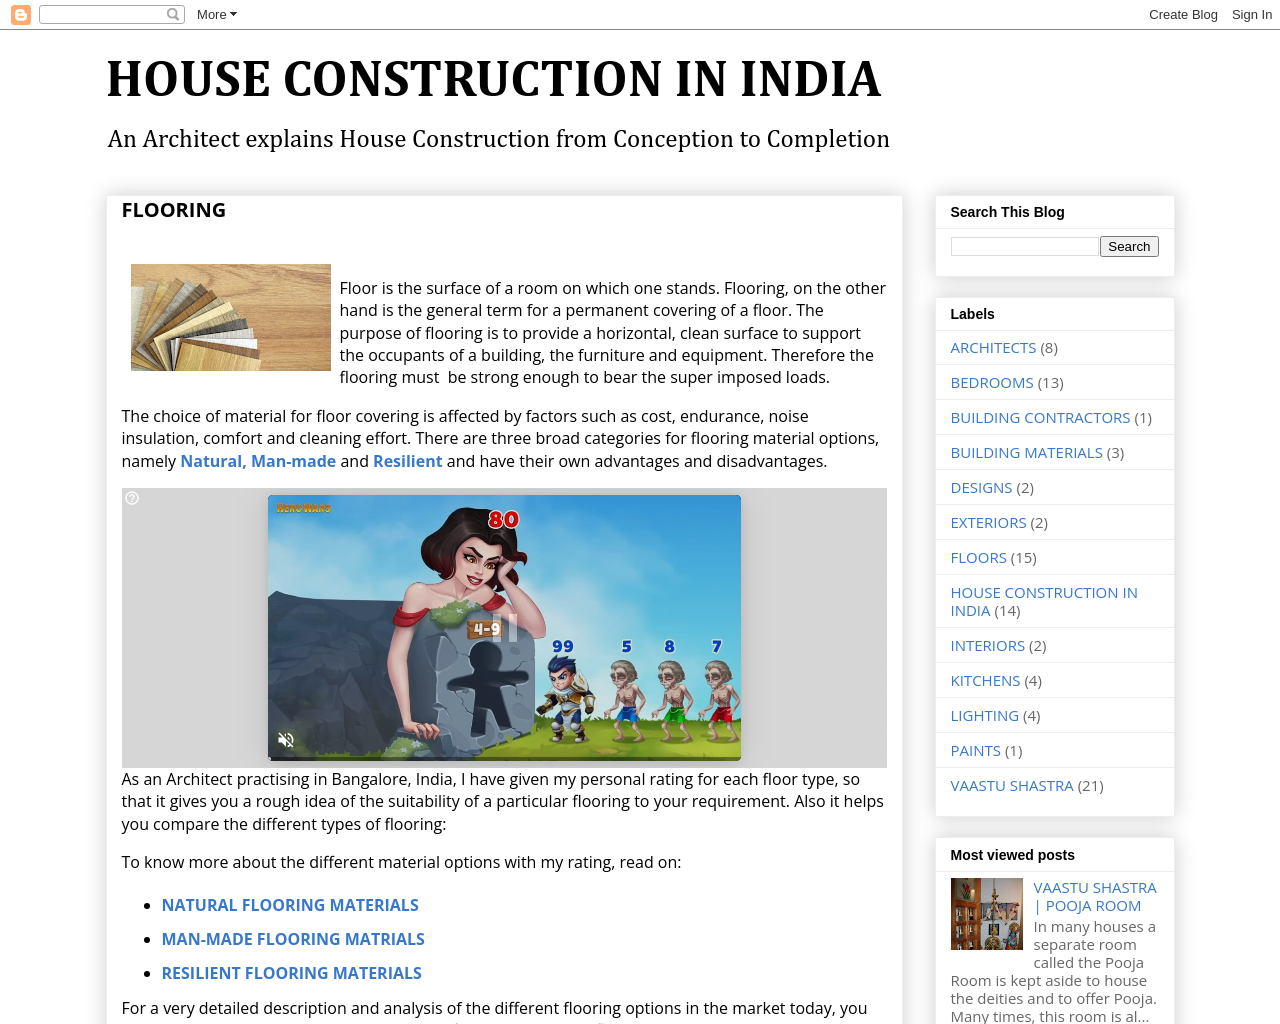 HOUSE CONSTRUCTION IN INDIA